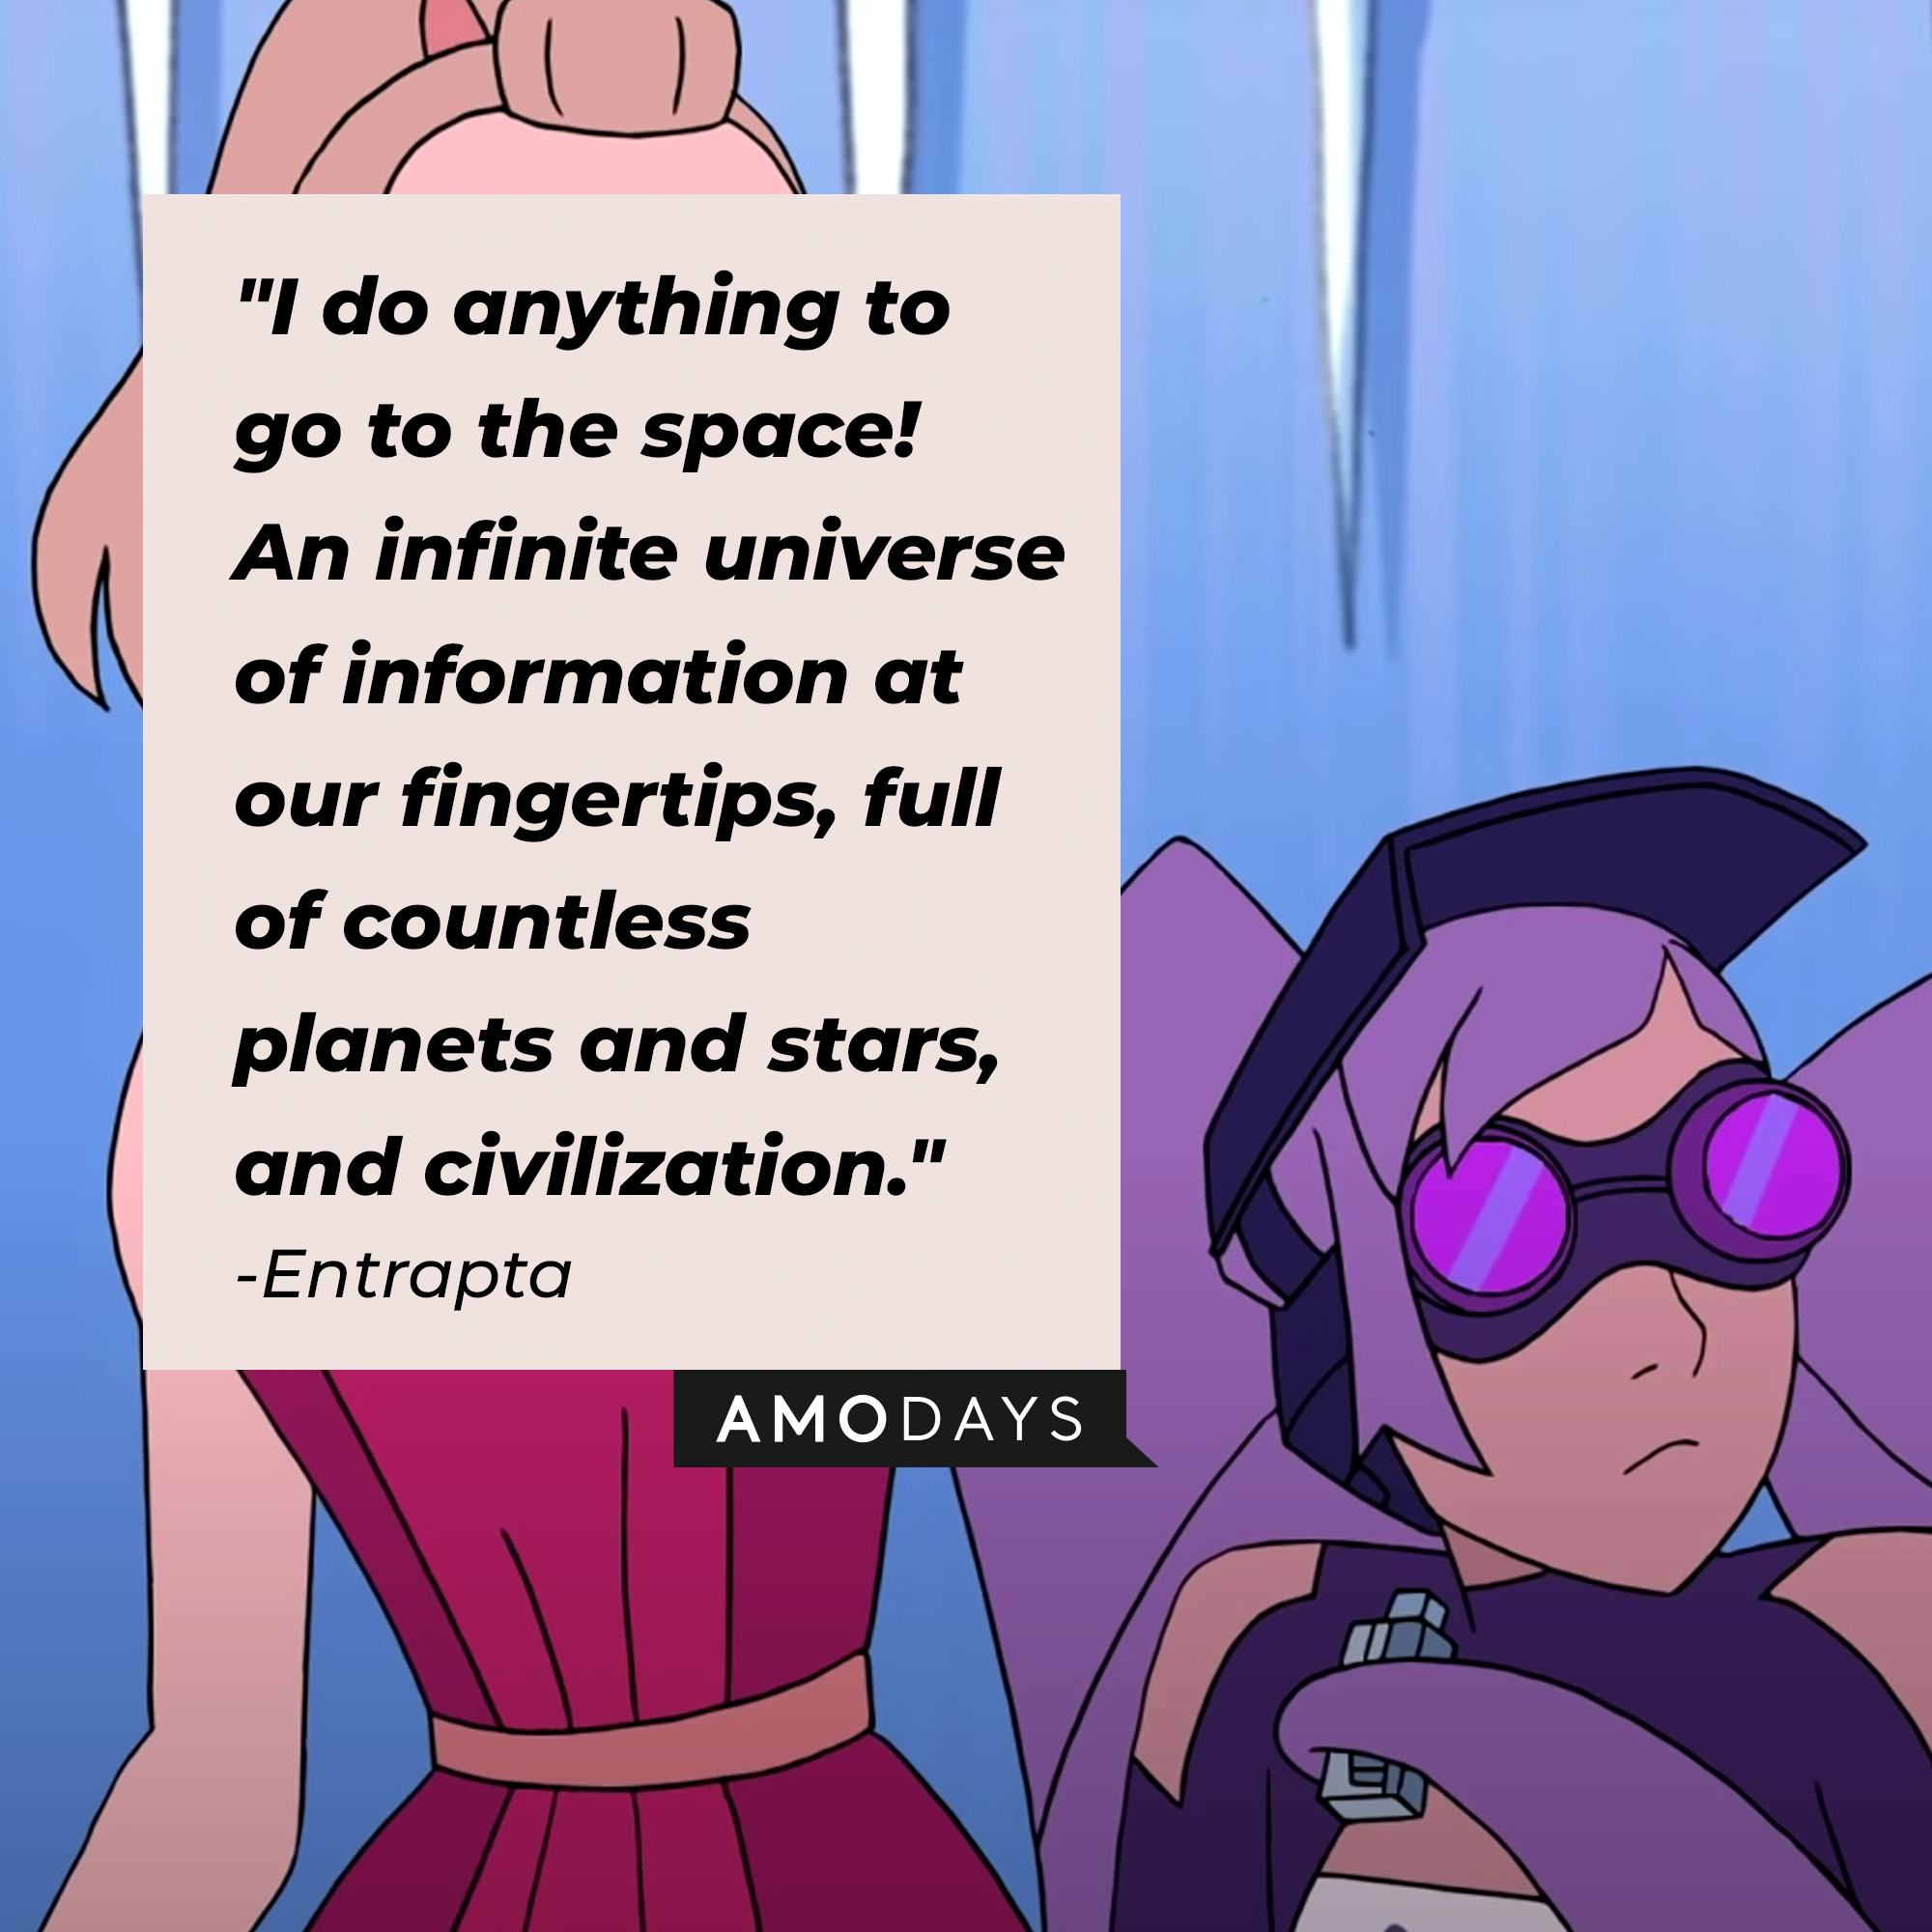 Entrapta's quote: "I do anything to go to the space! An infinite universe of information at our fingertips, full of countless planets and stars, and civilization." | Source: youtube.com/netflixafterschool